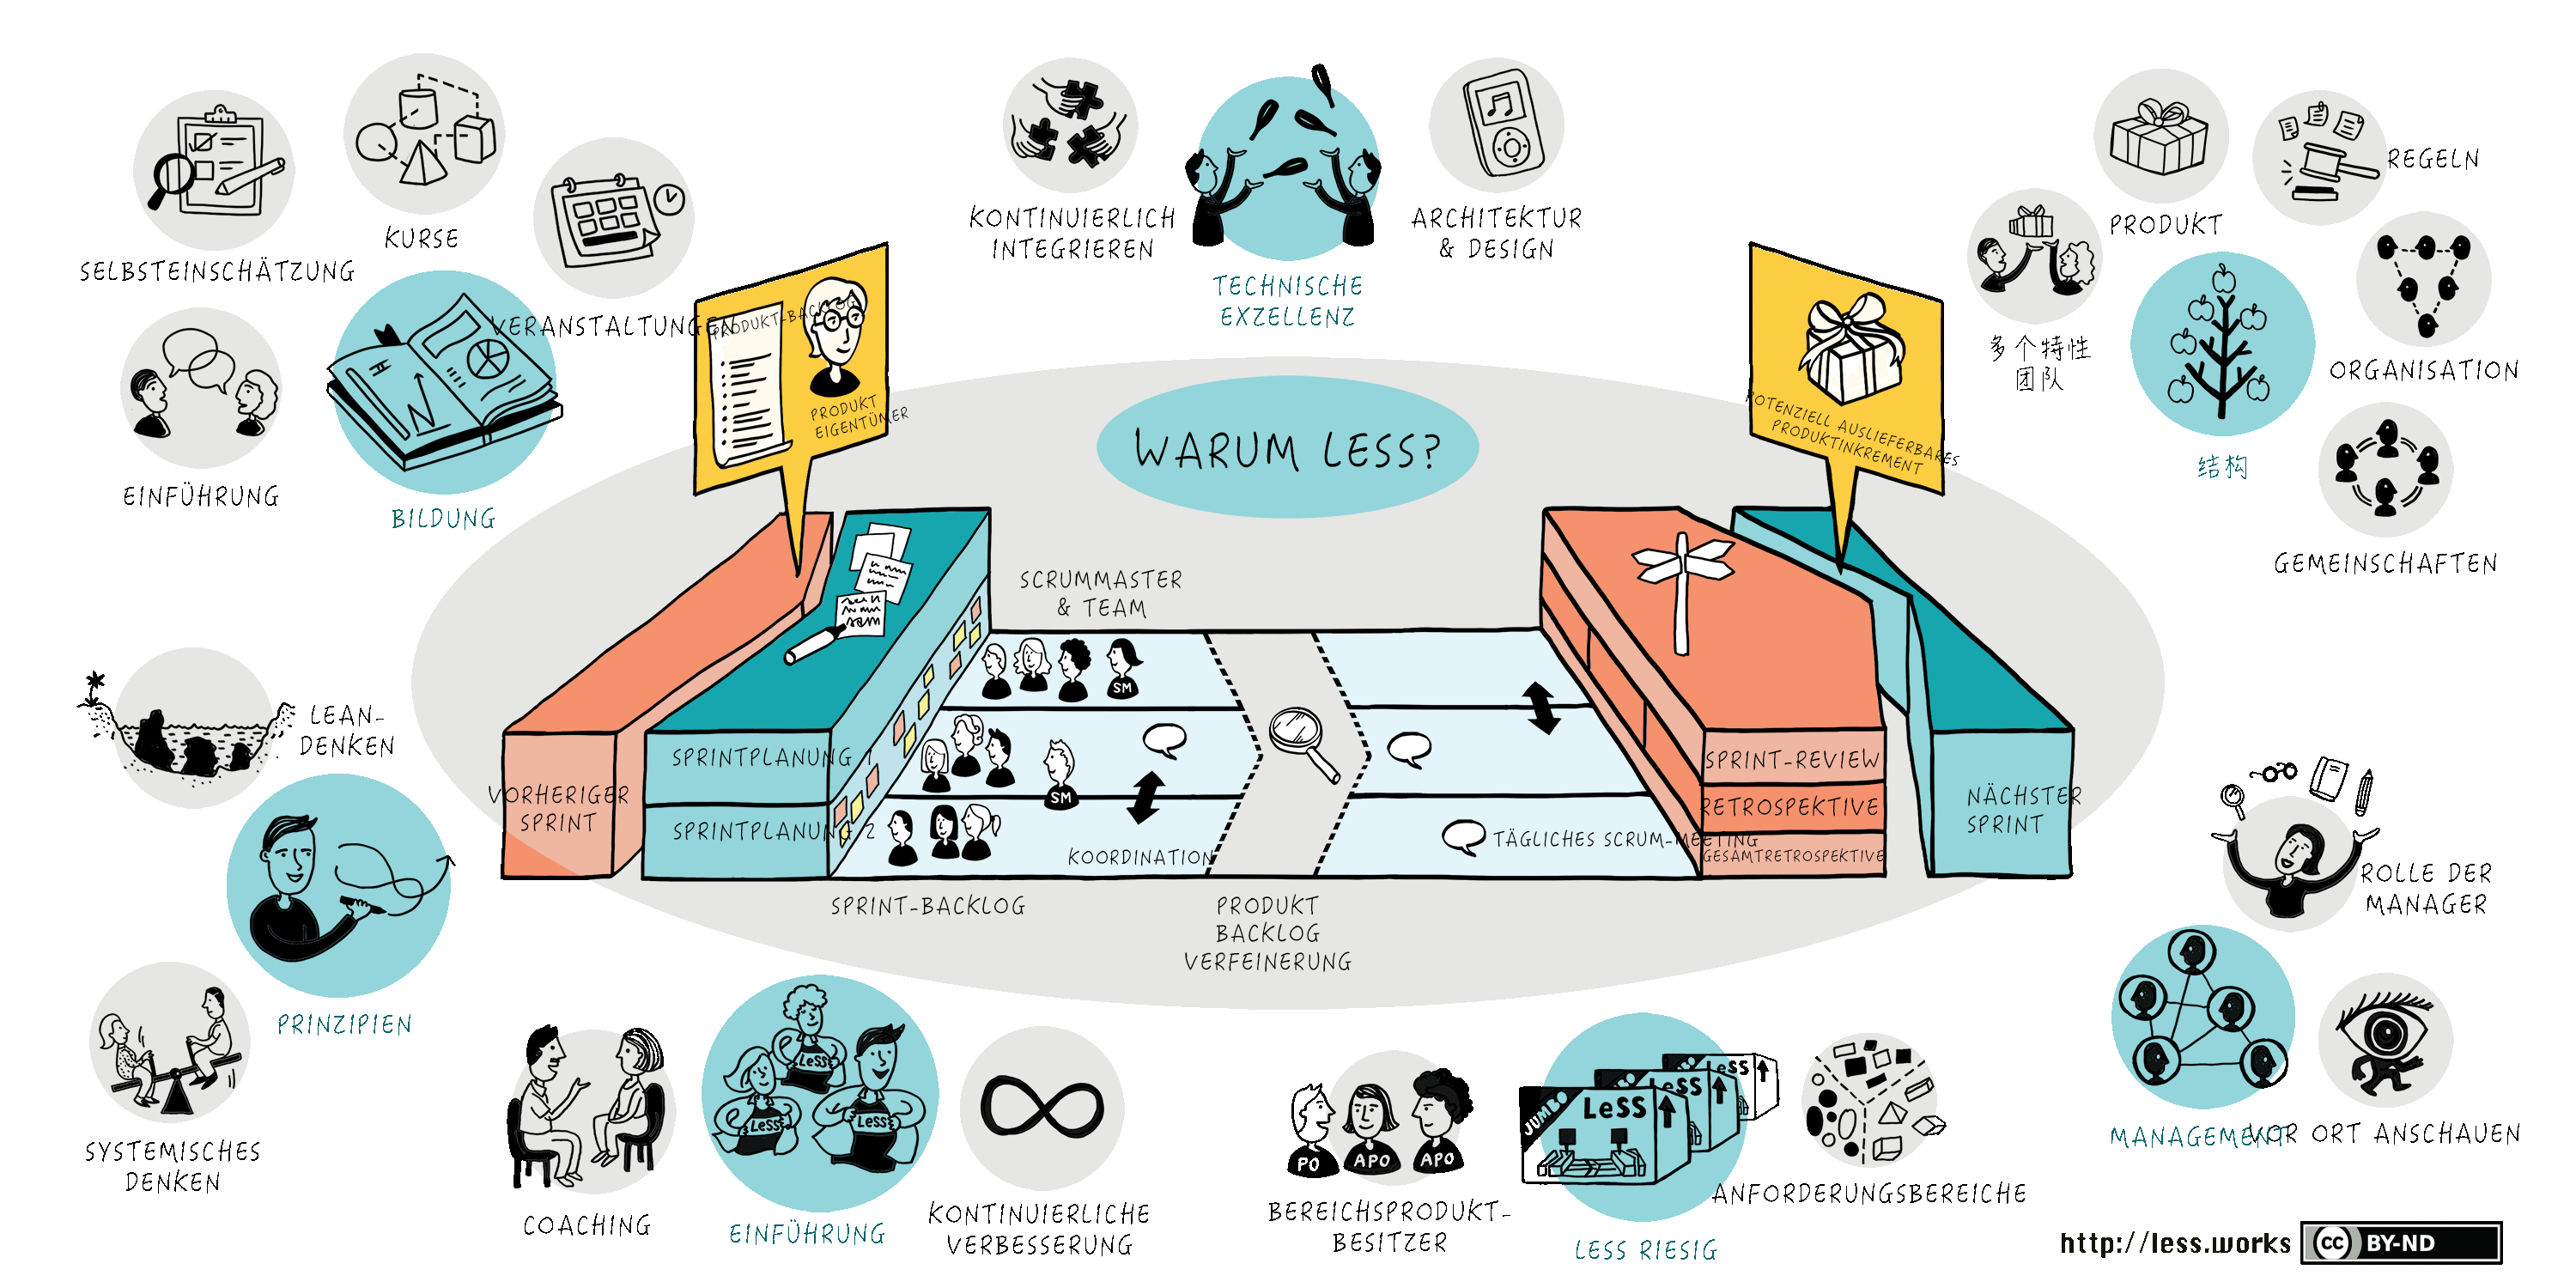 Large Scale Scrum (Less) Overview